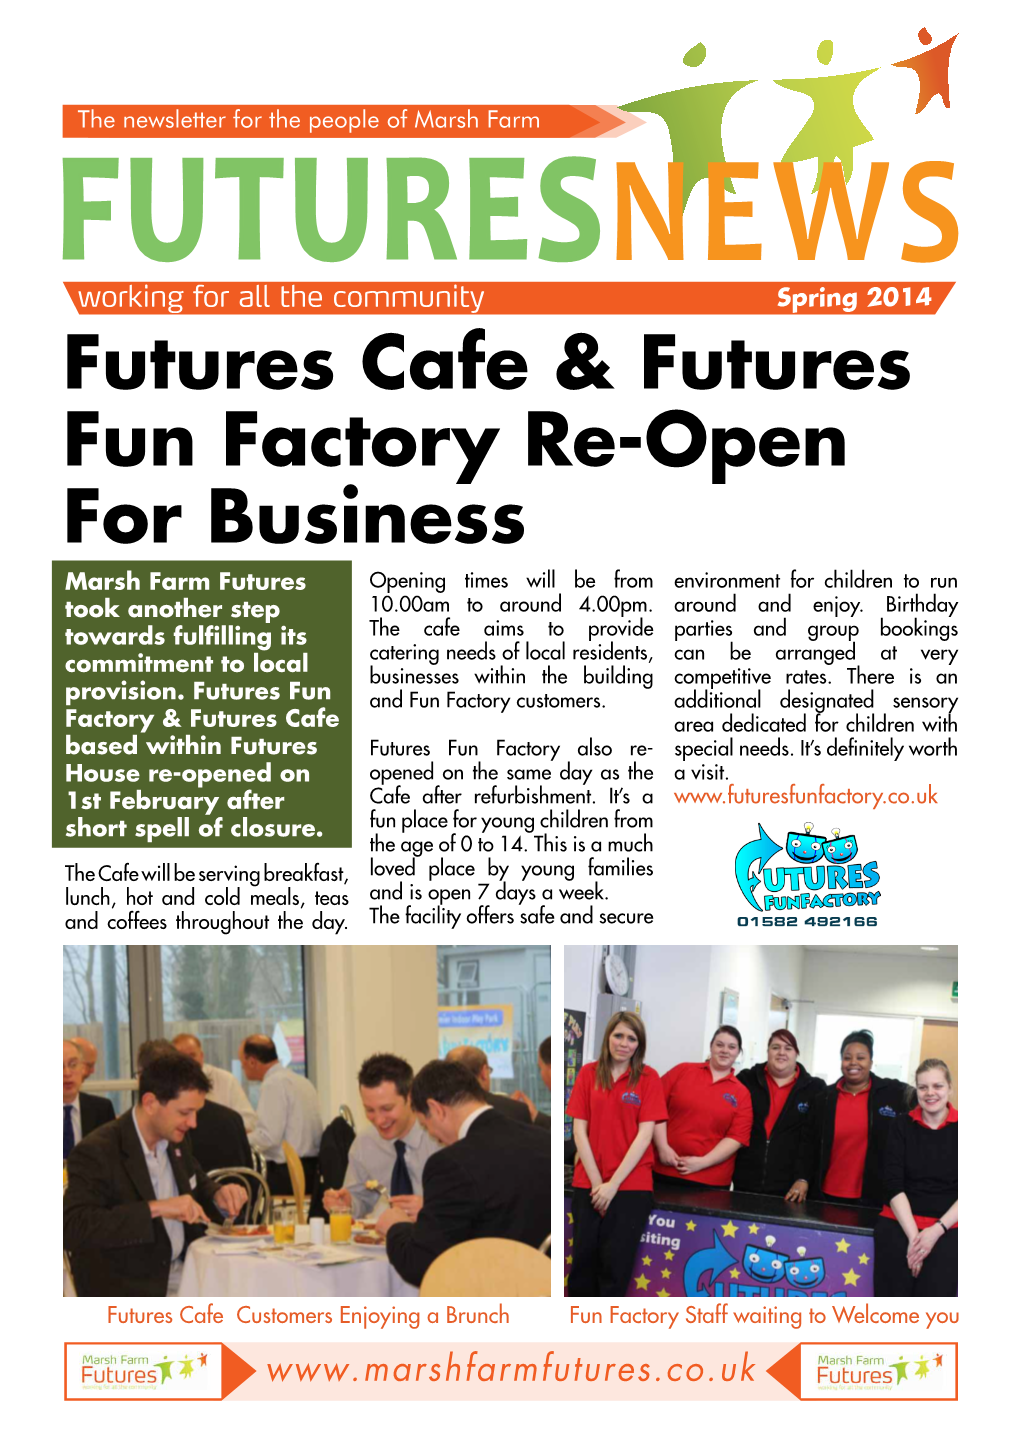 Futures Cafe & Futures Fun Factory Re-Open for Business